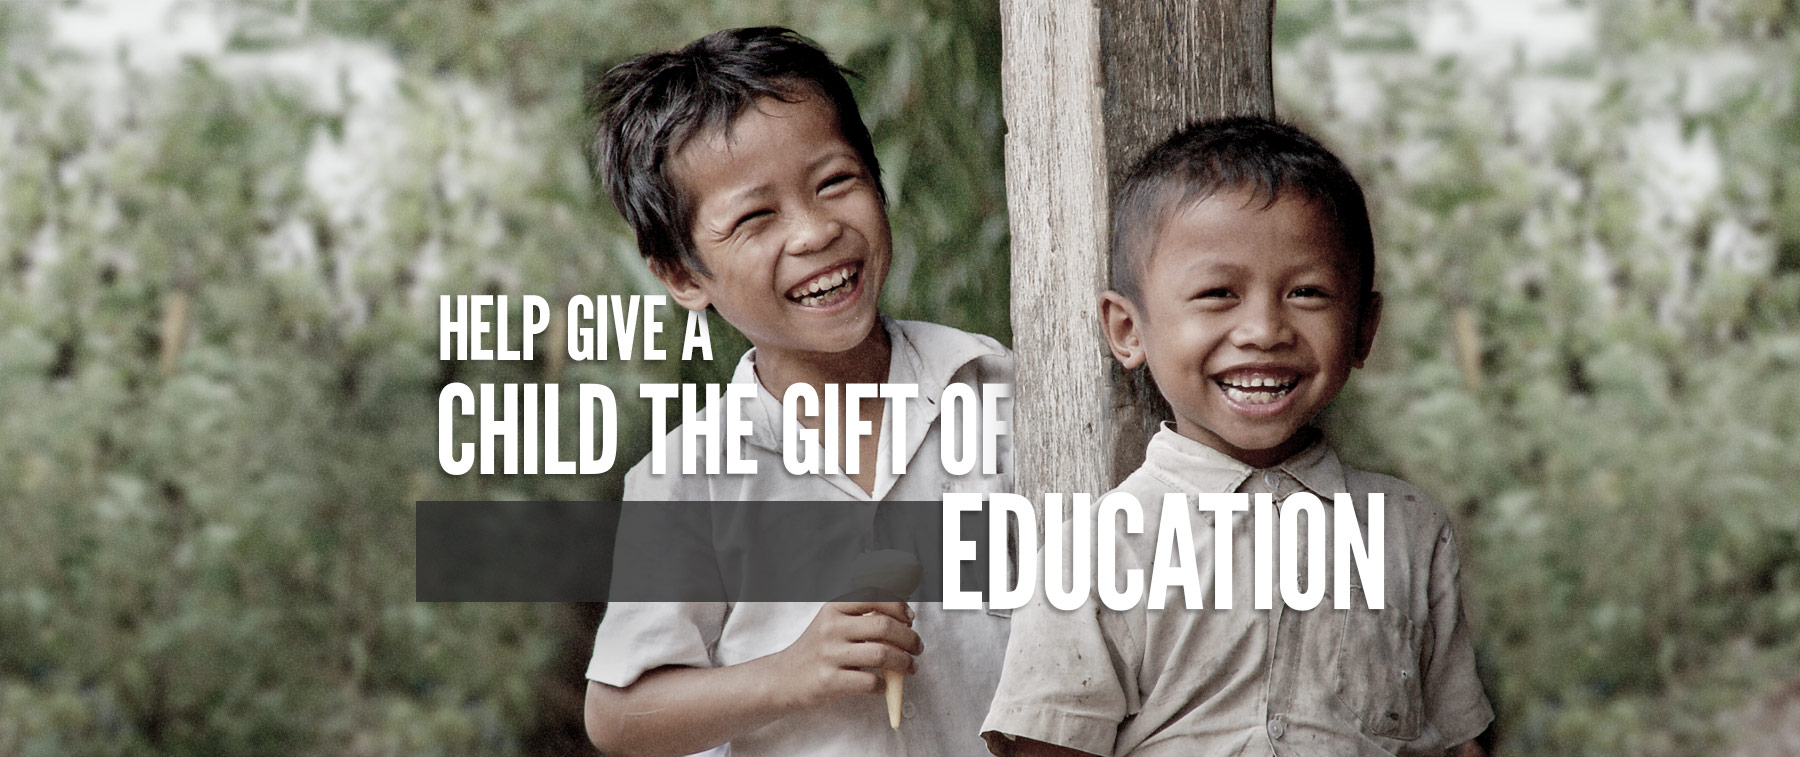 Opportunity Cambodia - Help give a child the gift of education